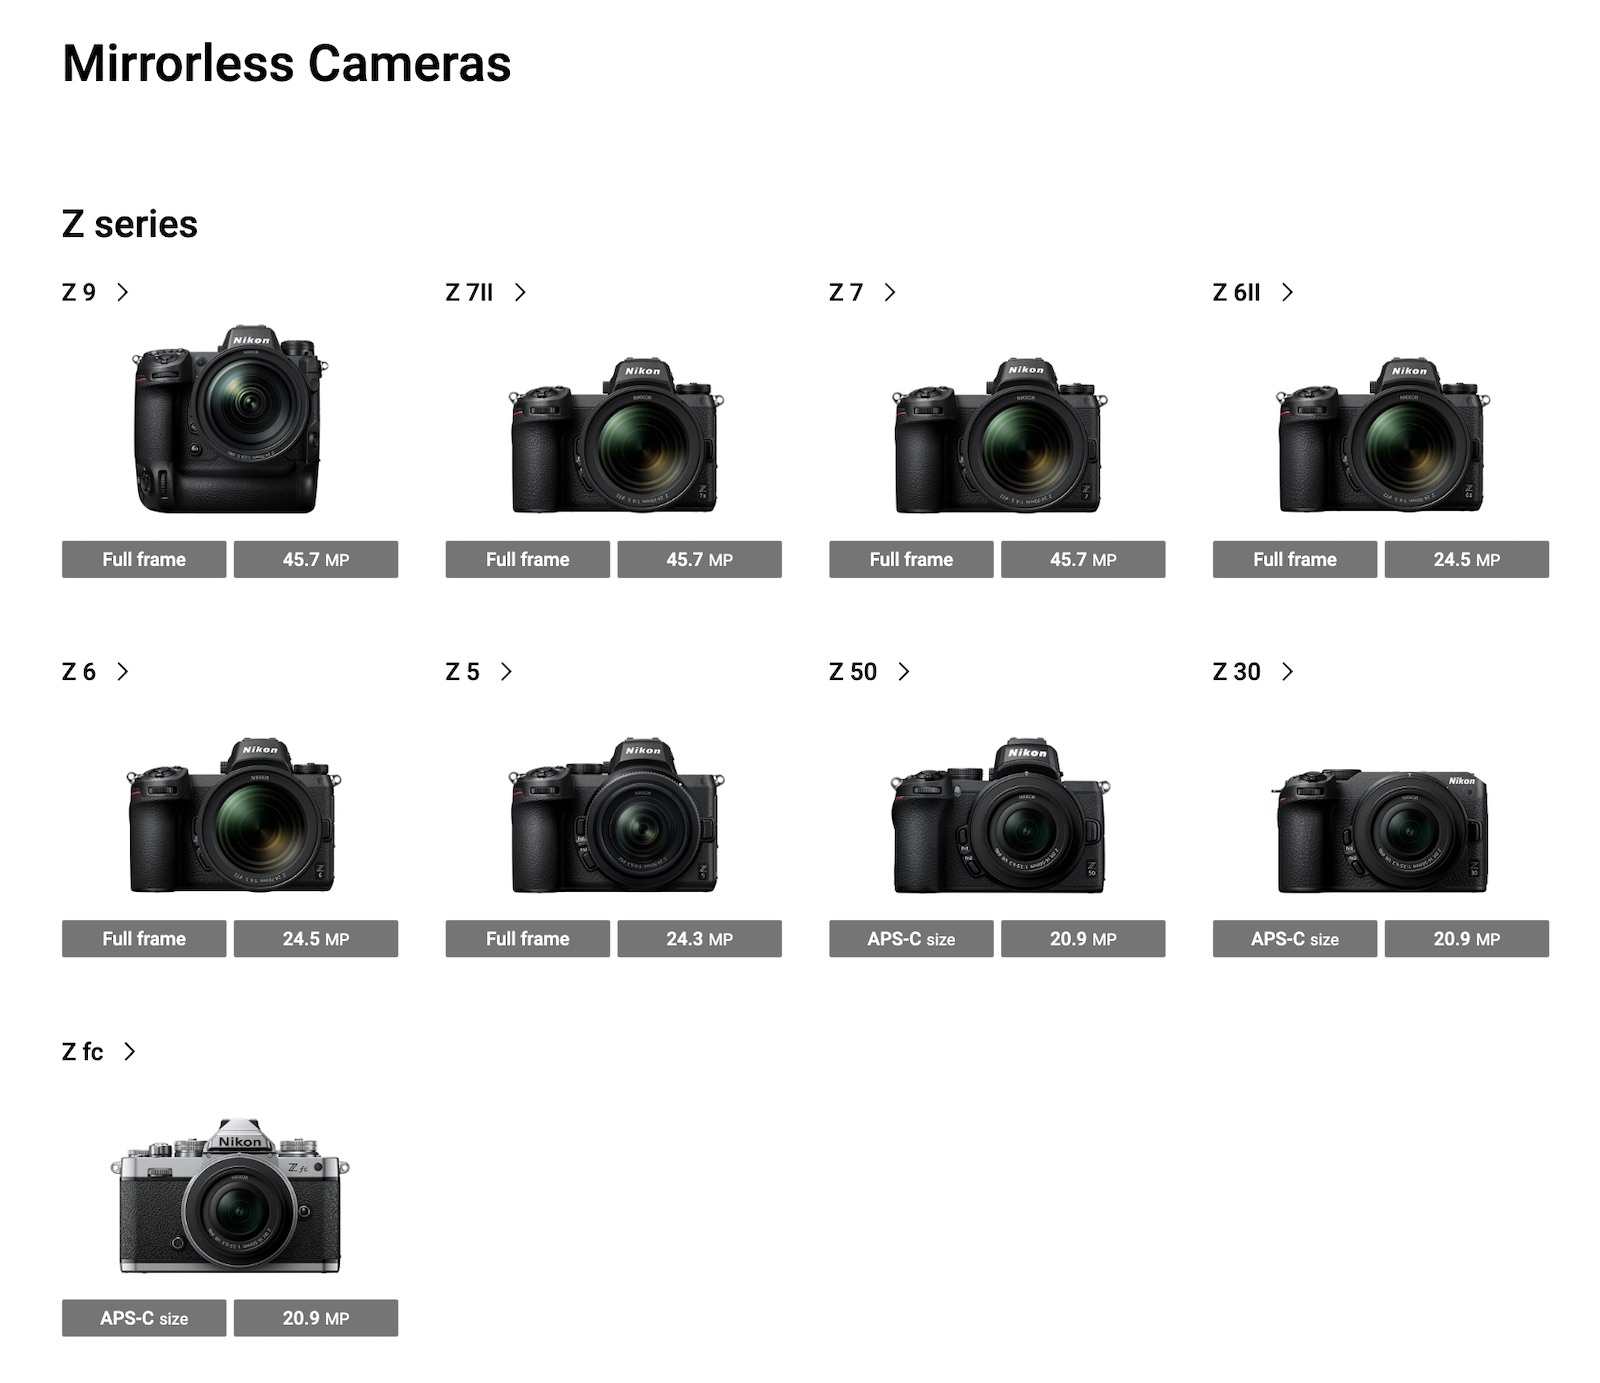 Another curiosity: Nikon Germany lists ten mirrorless cameras on their ...